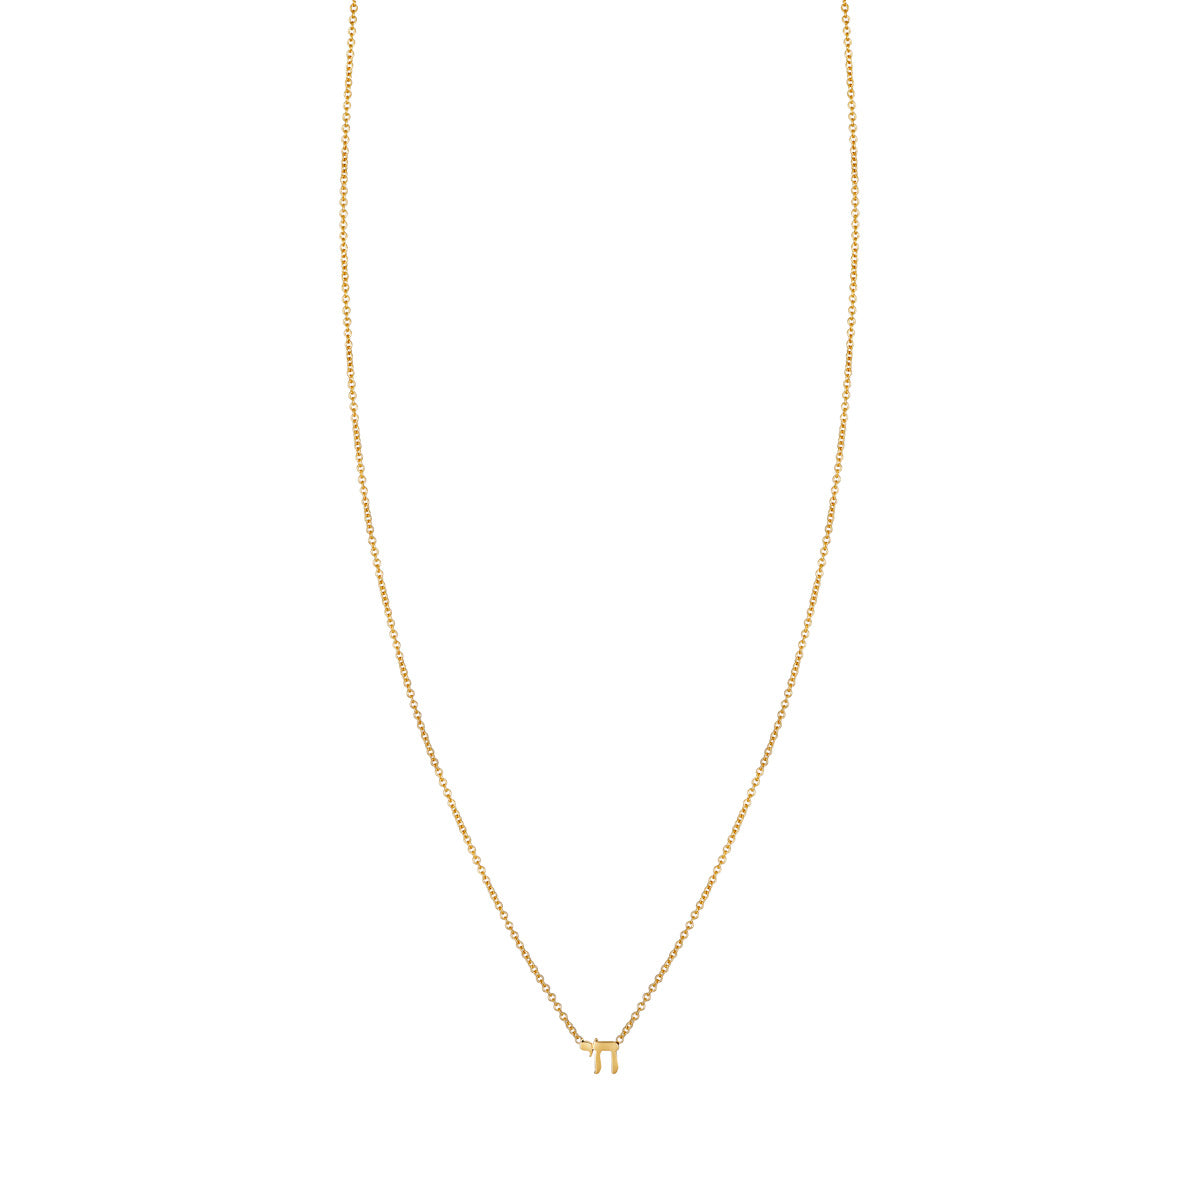 Tiny Gold Chai Necklace in